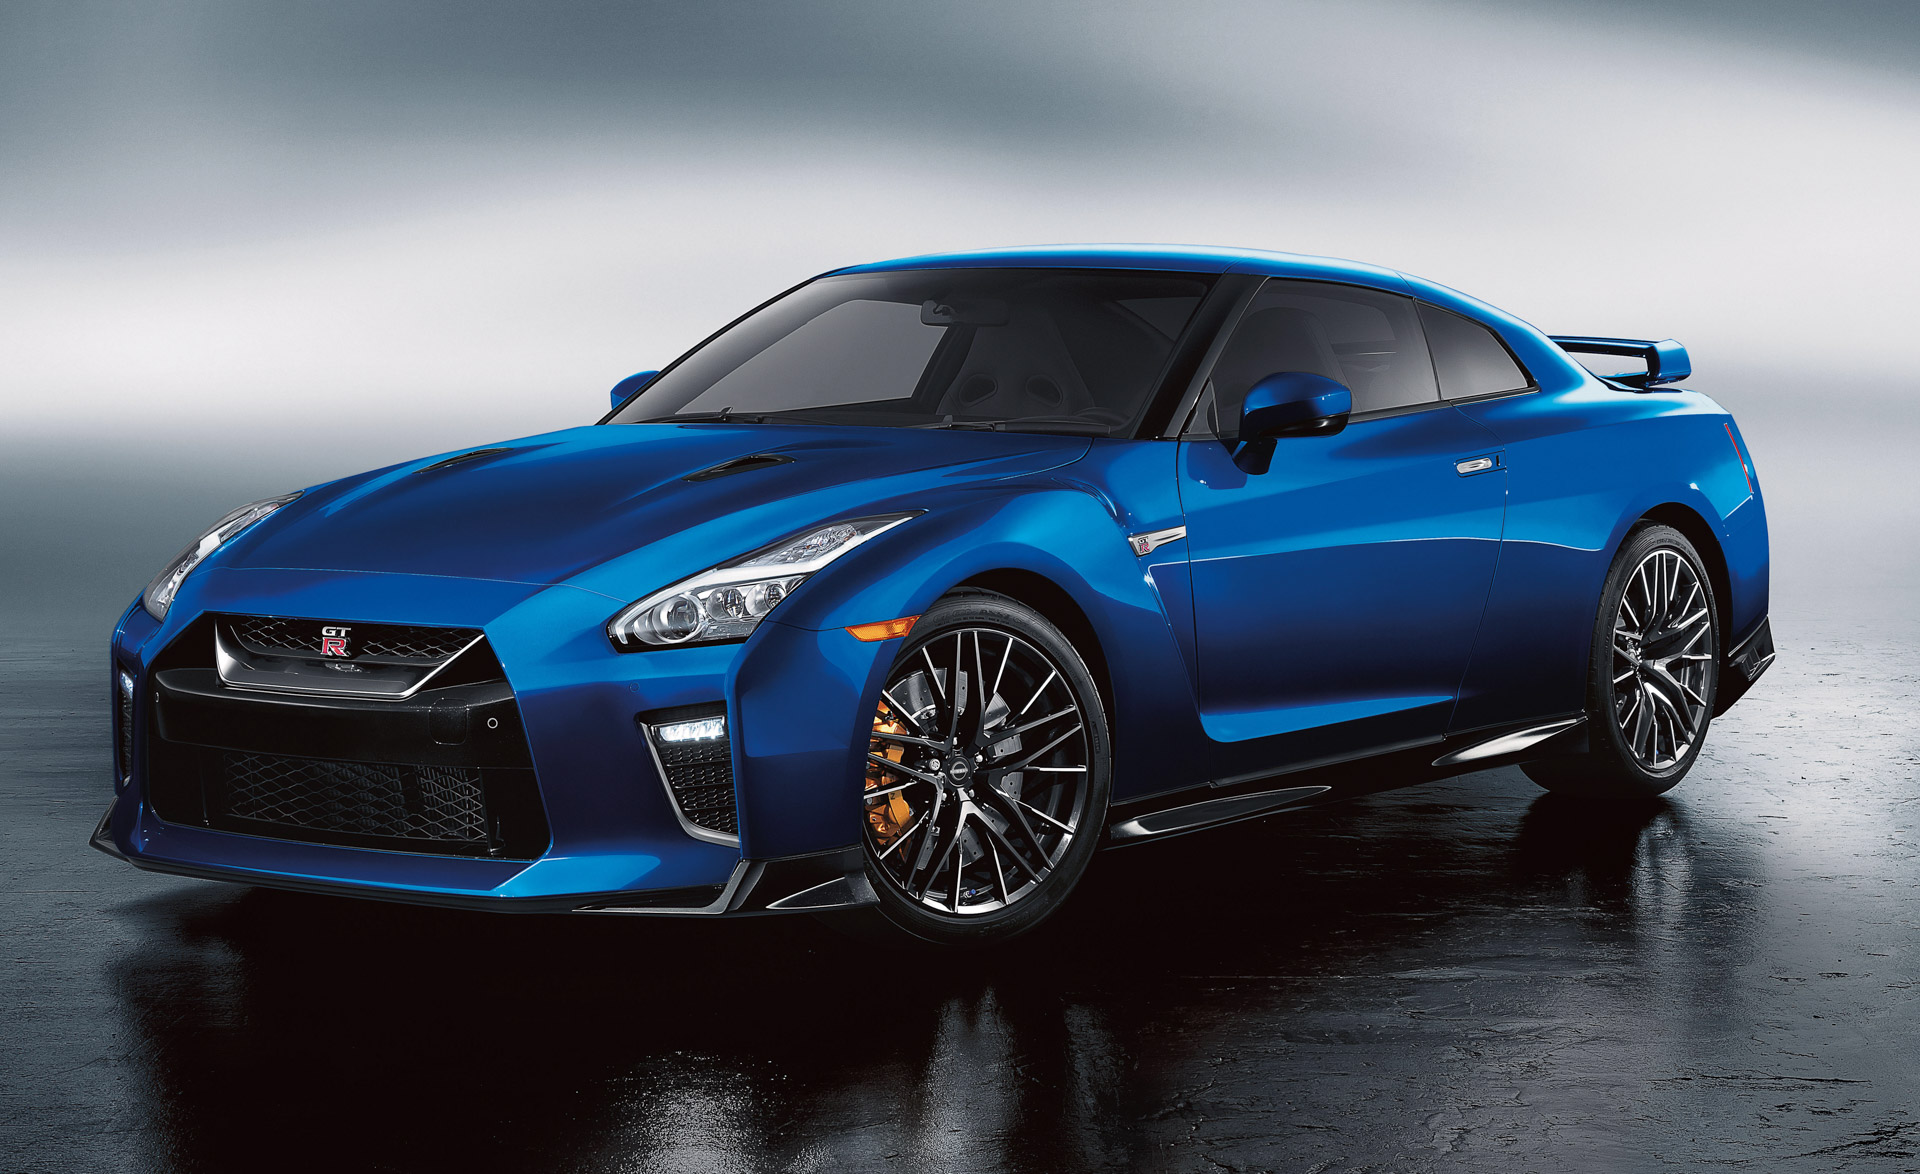 Does Nissan develop GT-R R36?? Or do we continue history with 2024